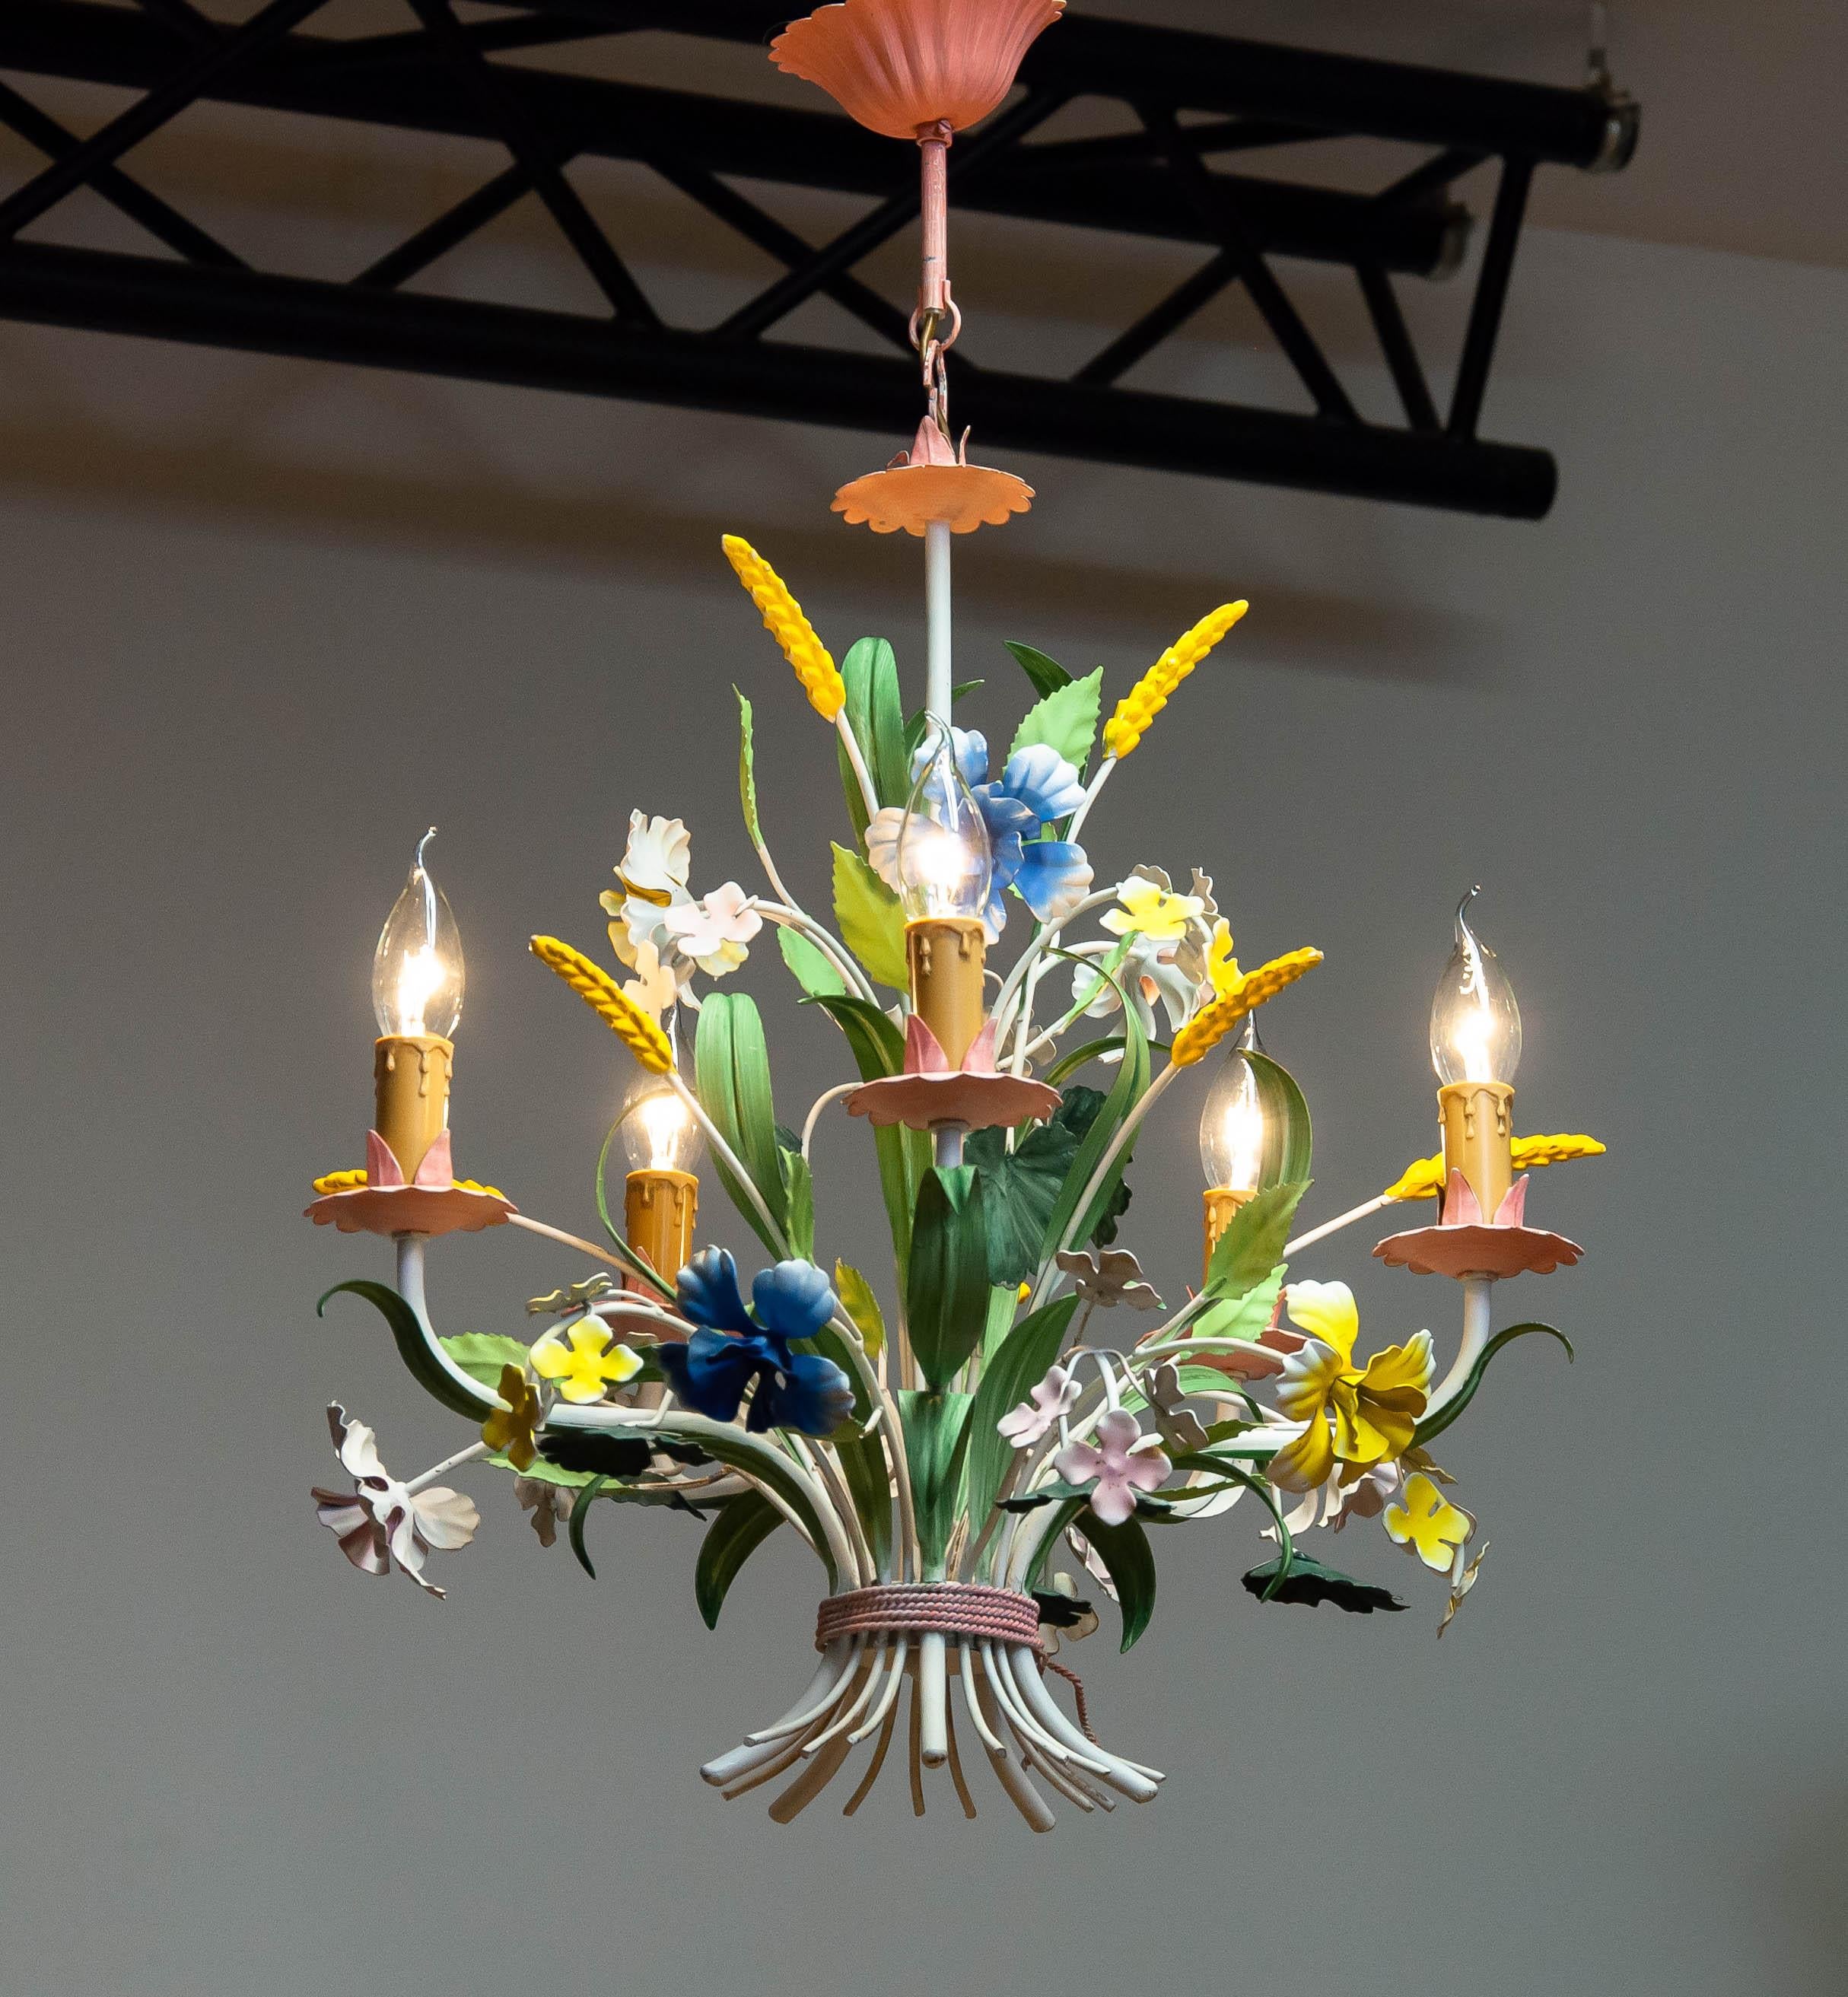 Mid-20th Century 1960s Bright Boho Chic Italian Tole Painted Metal Chandelier With Floral Decor For Sale